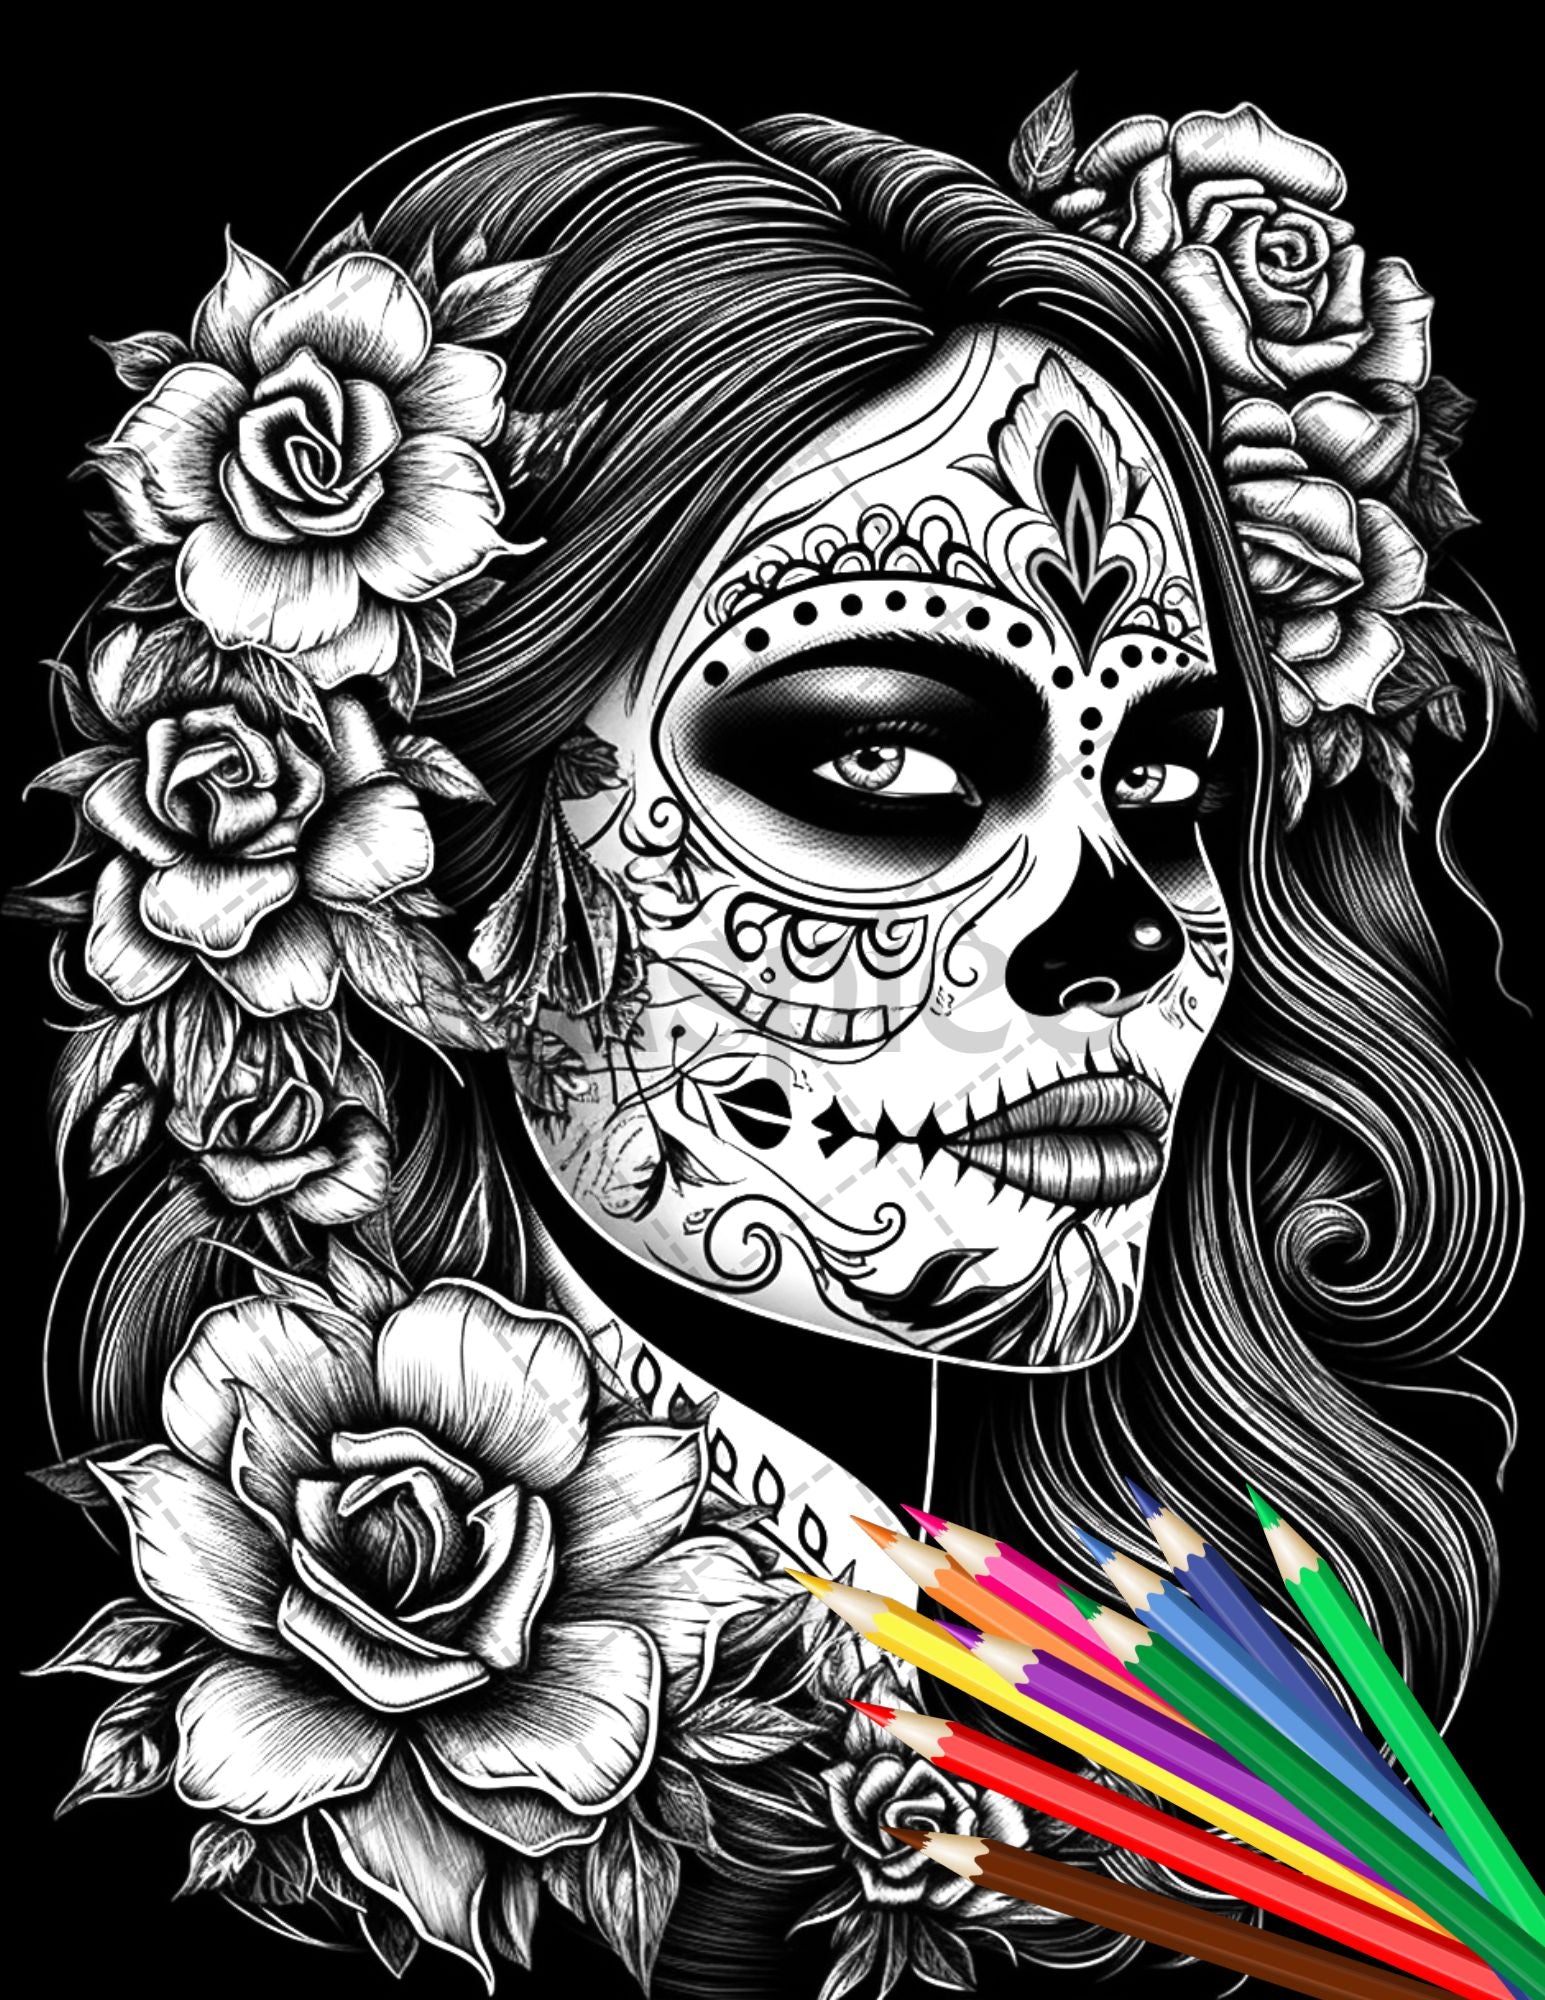 30 Printable Horror Bride Coloring Pages for Adults, Gothic Wedding Grayscale Coloring Book, Instant Download PDF - raspiee